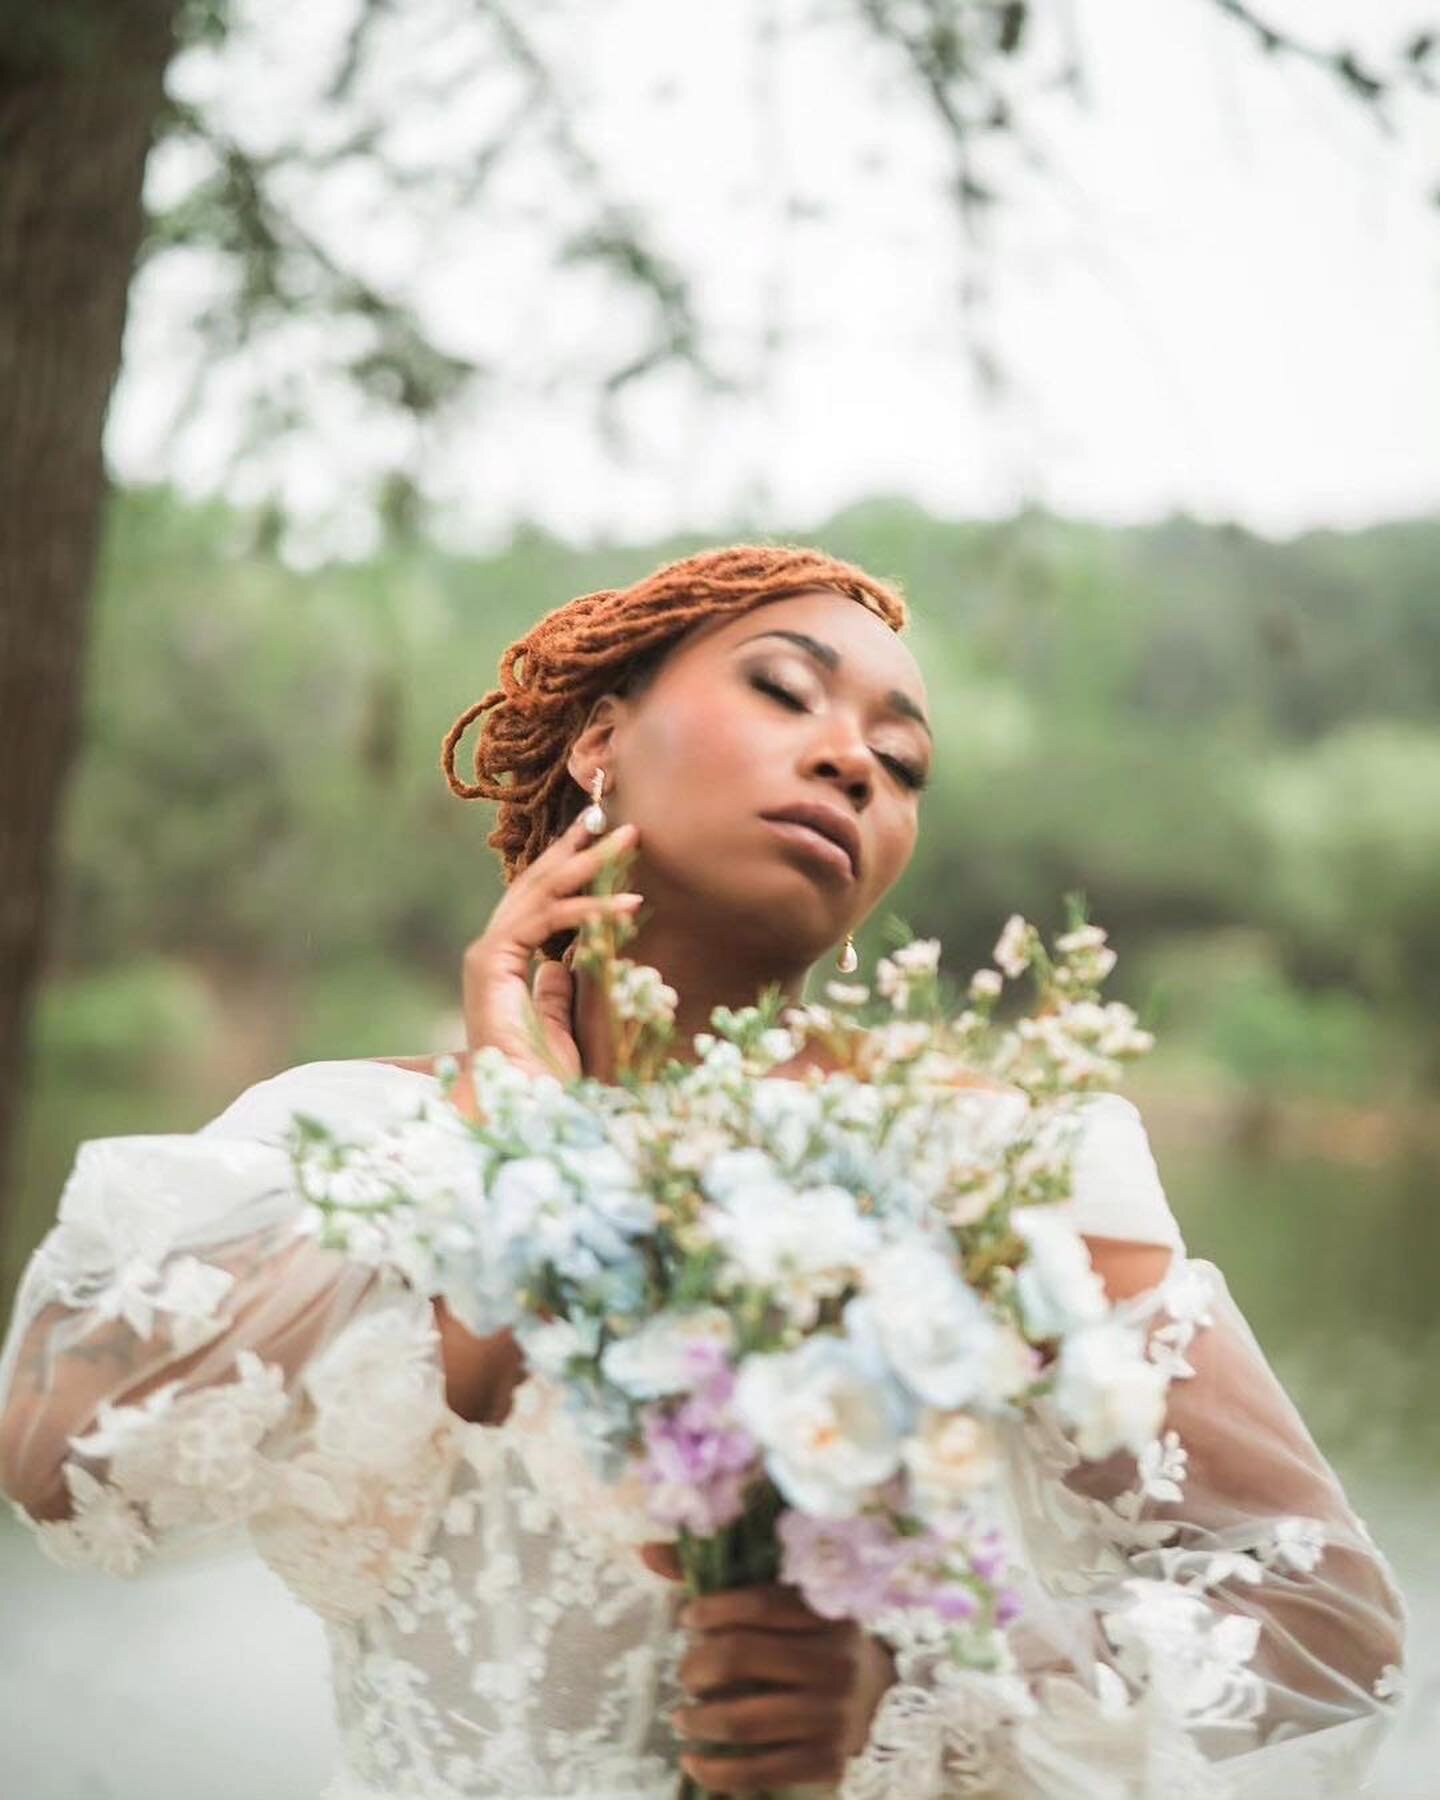 This bride is absolute fire!

@nyeusi_almasi 
@laynilous 
@hairstyles_claudiaorozco
@livbeautified 
@photosbysarahthompson
@bellesoulflorals 
@oliviagracebridal 
@thepreserveatcanyonlake